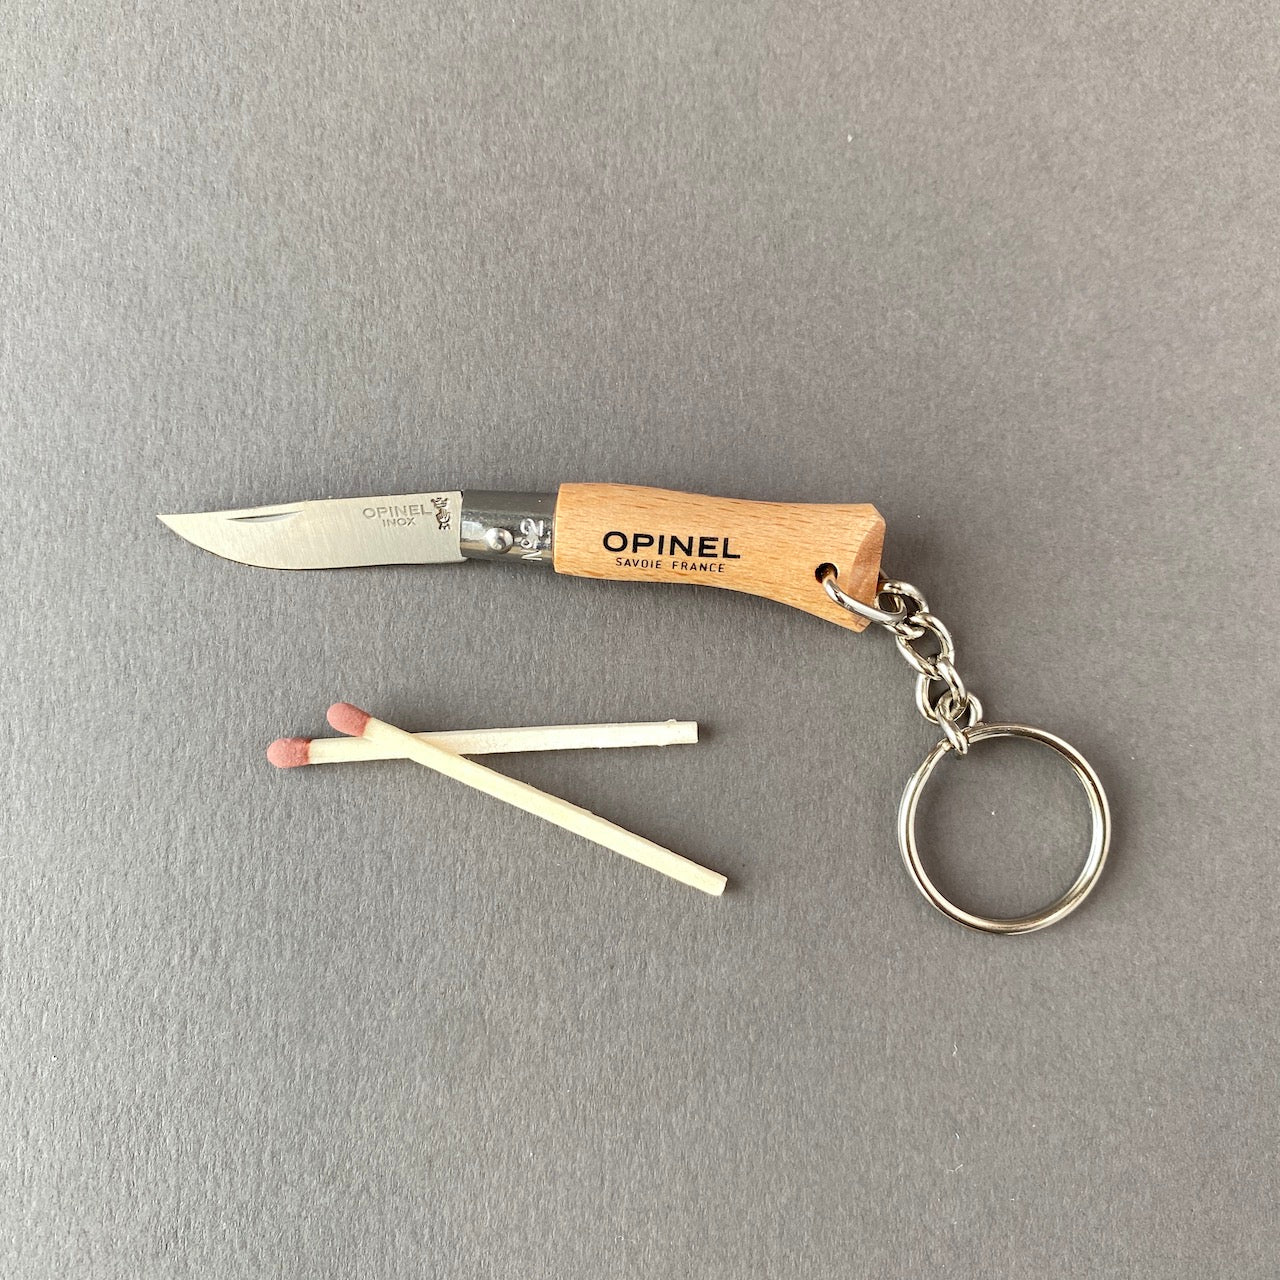 Small key chain pocket knife made out of beech wood with stainless steel blade connected to key ring with small chain-folded open with matchstick for scale reference